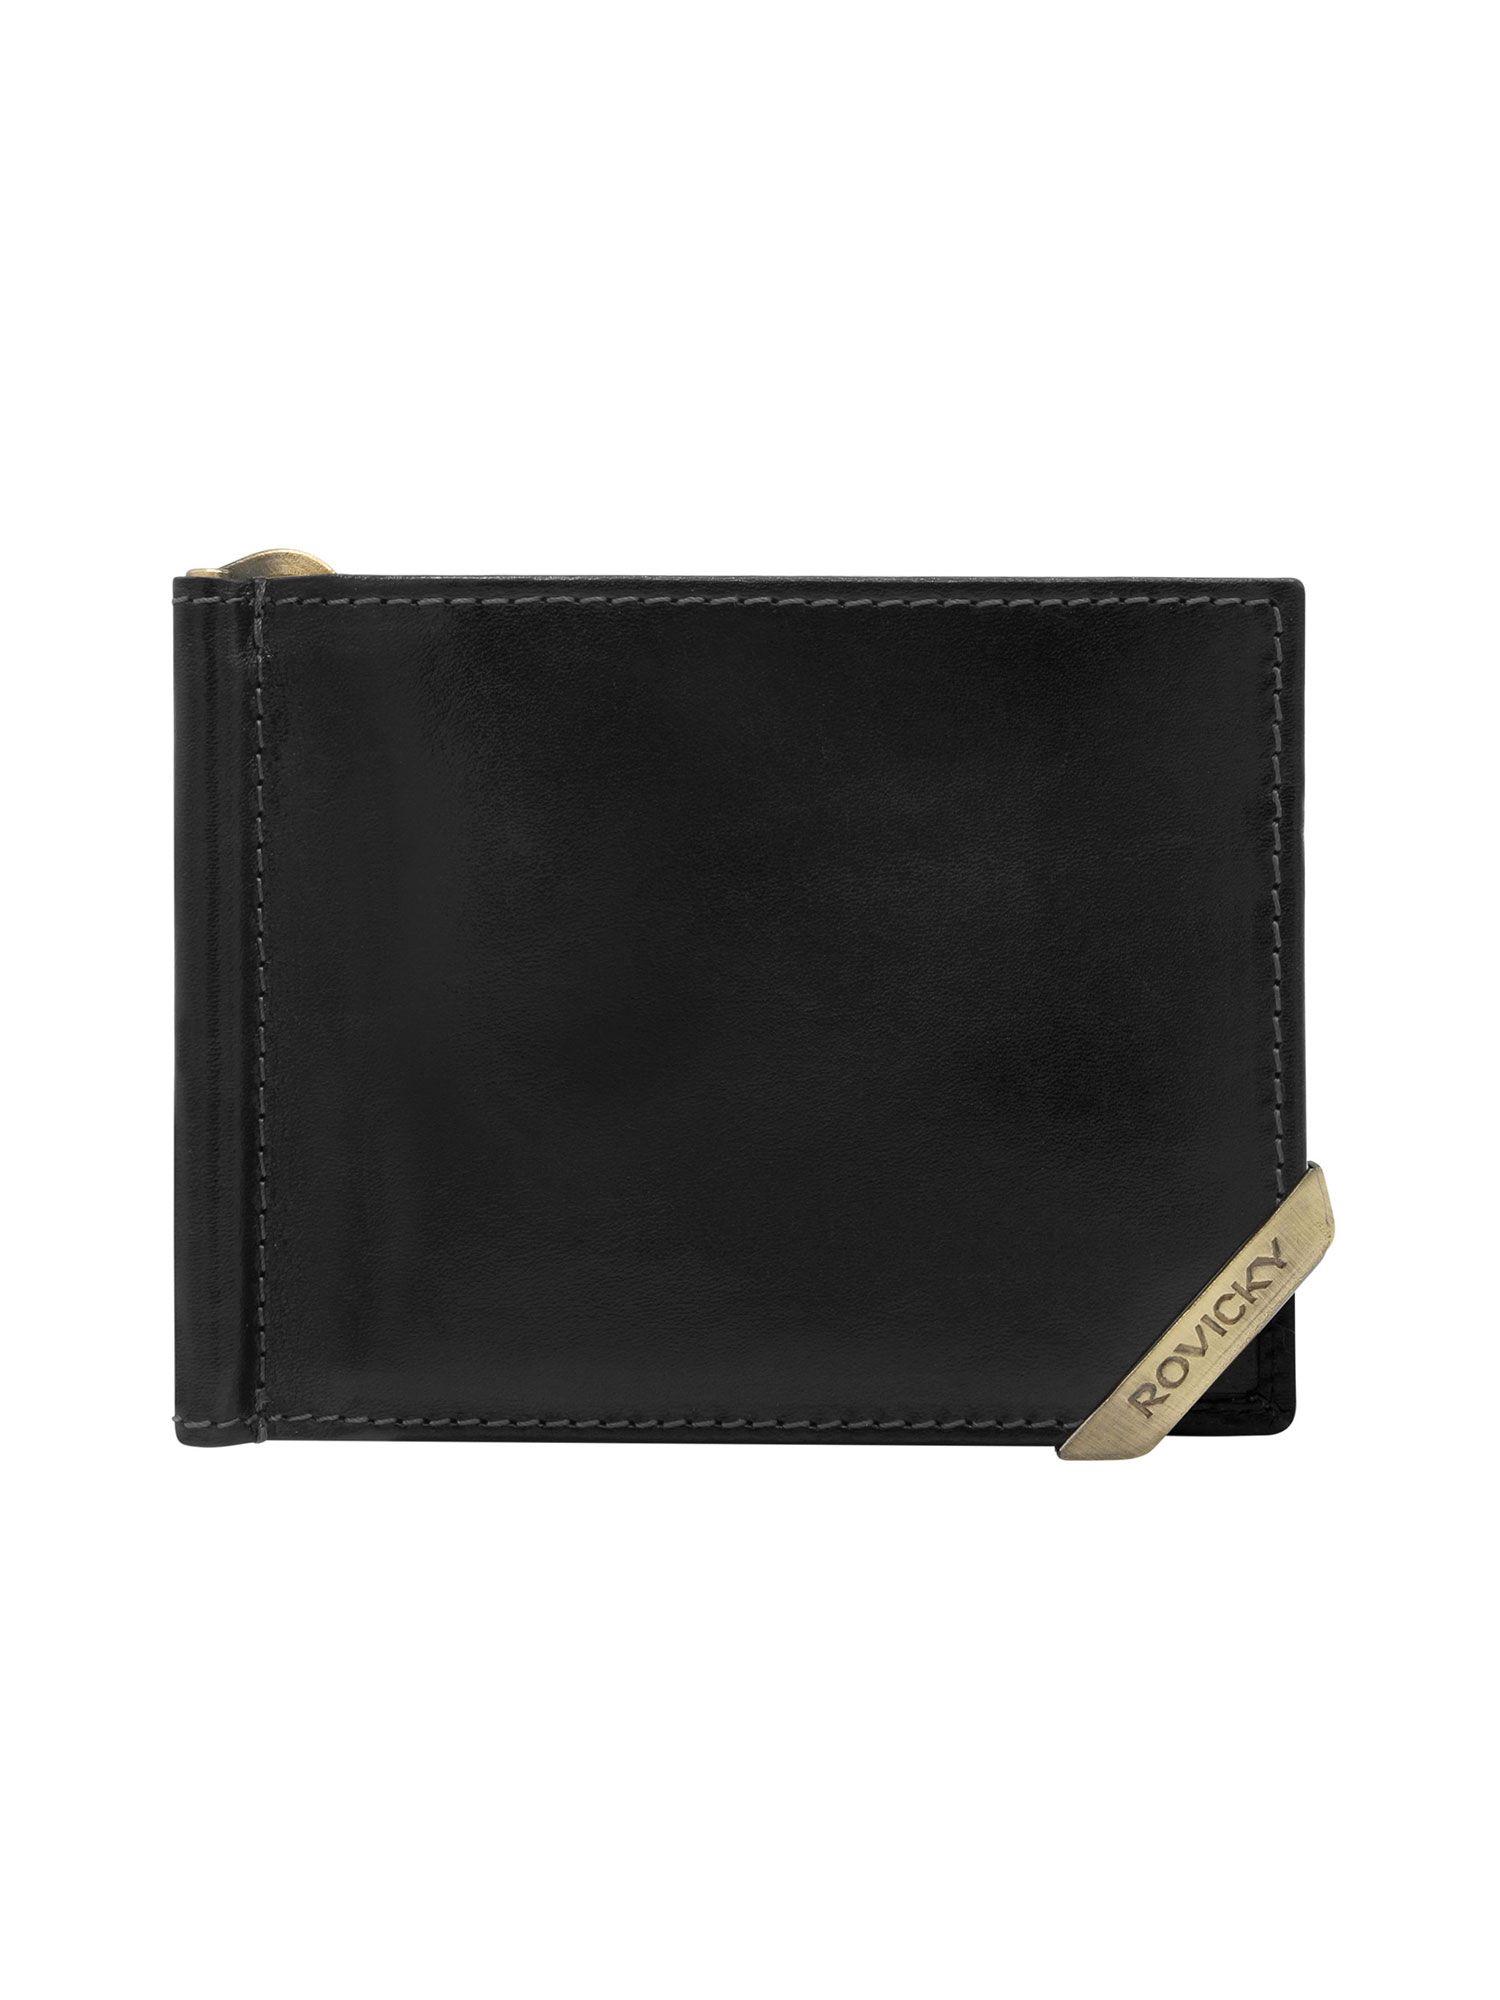 Black and dark brown banknote wallet with compartments